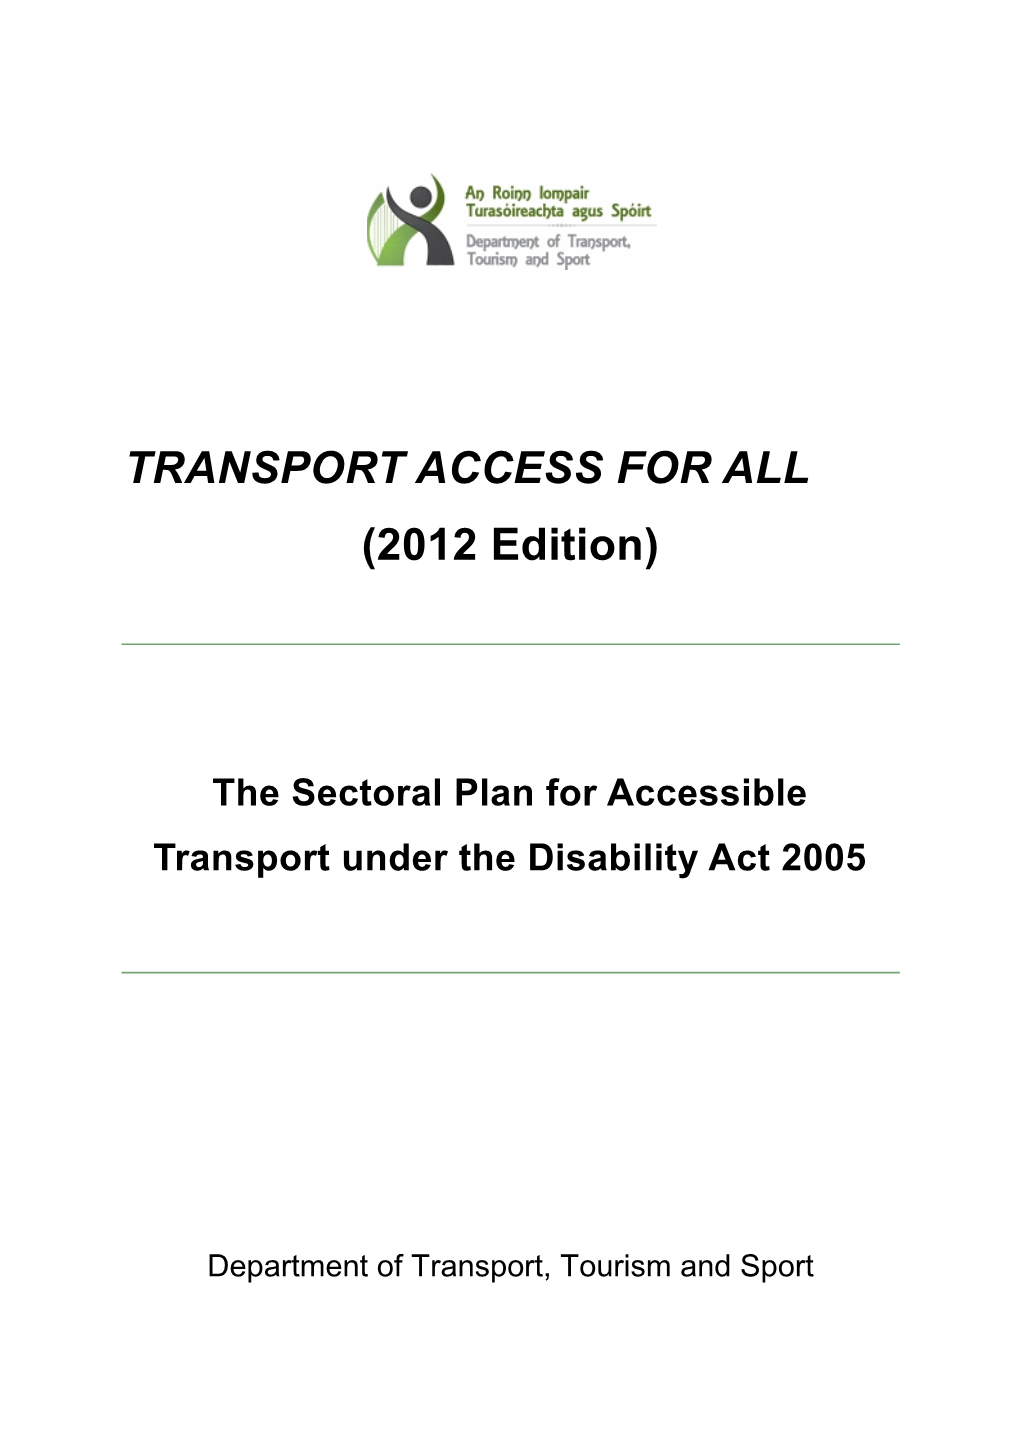 TRANSPORT ACCESS for ALL (2012 Edition)